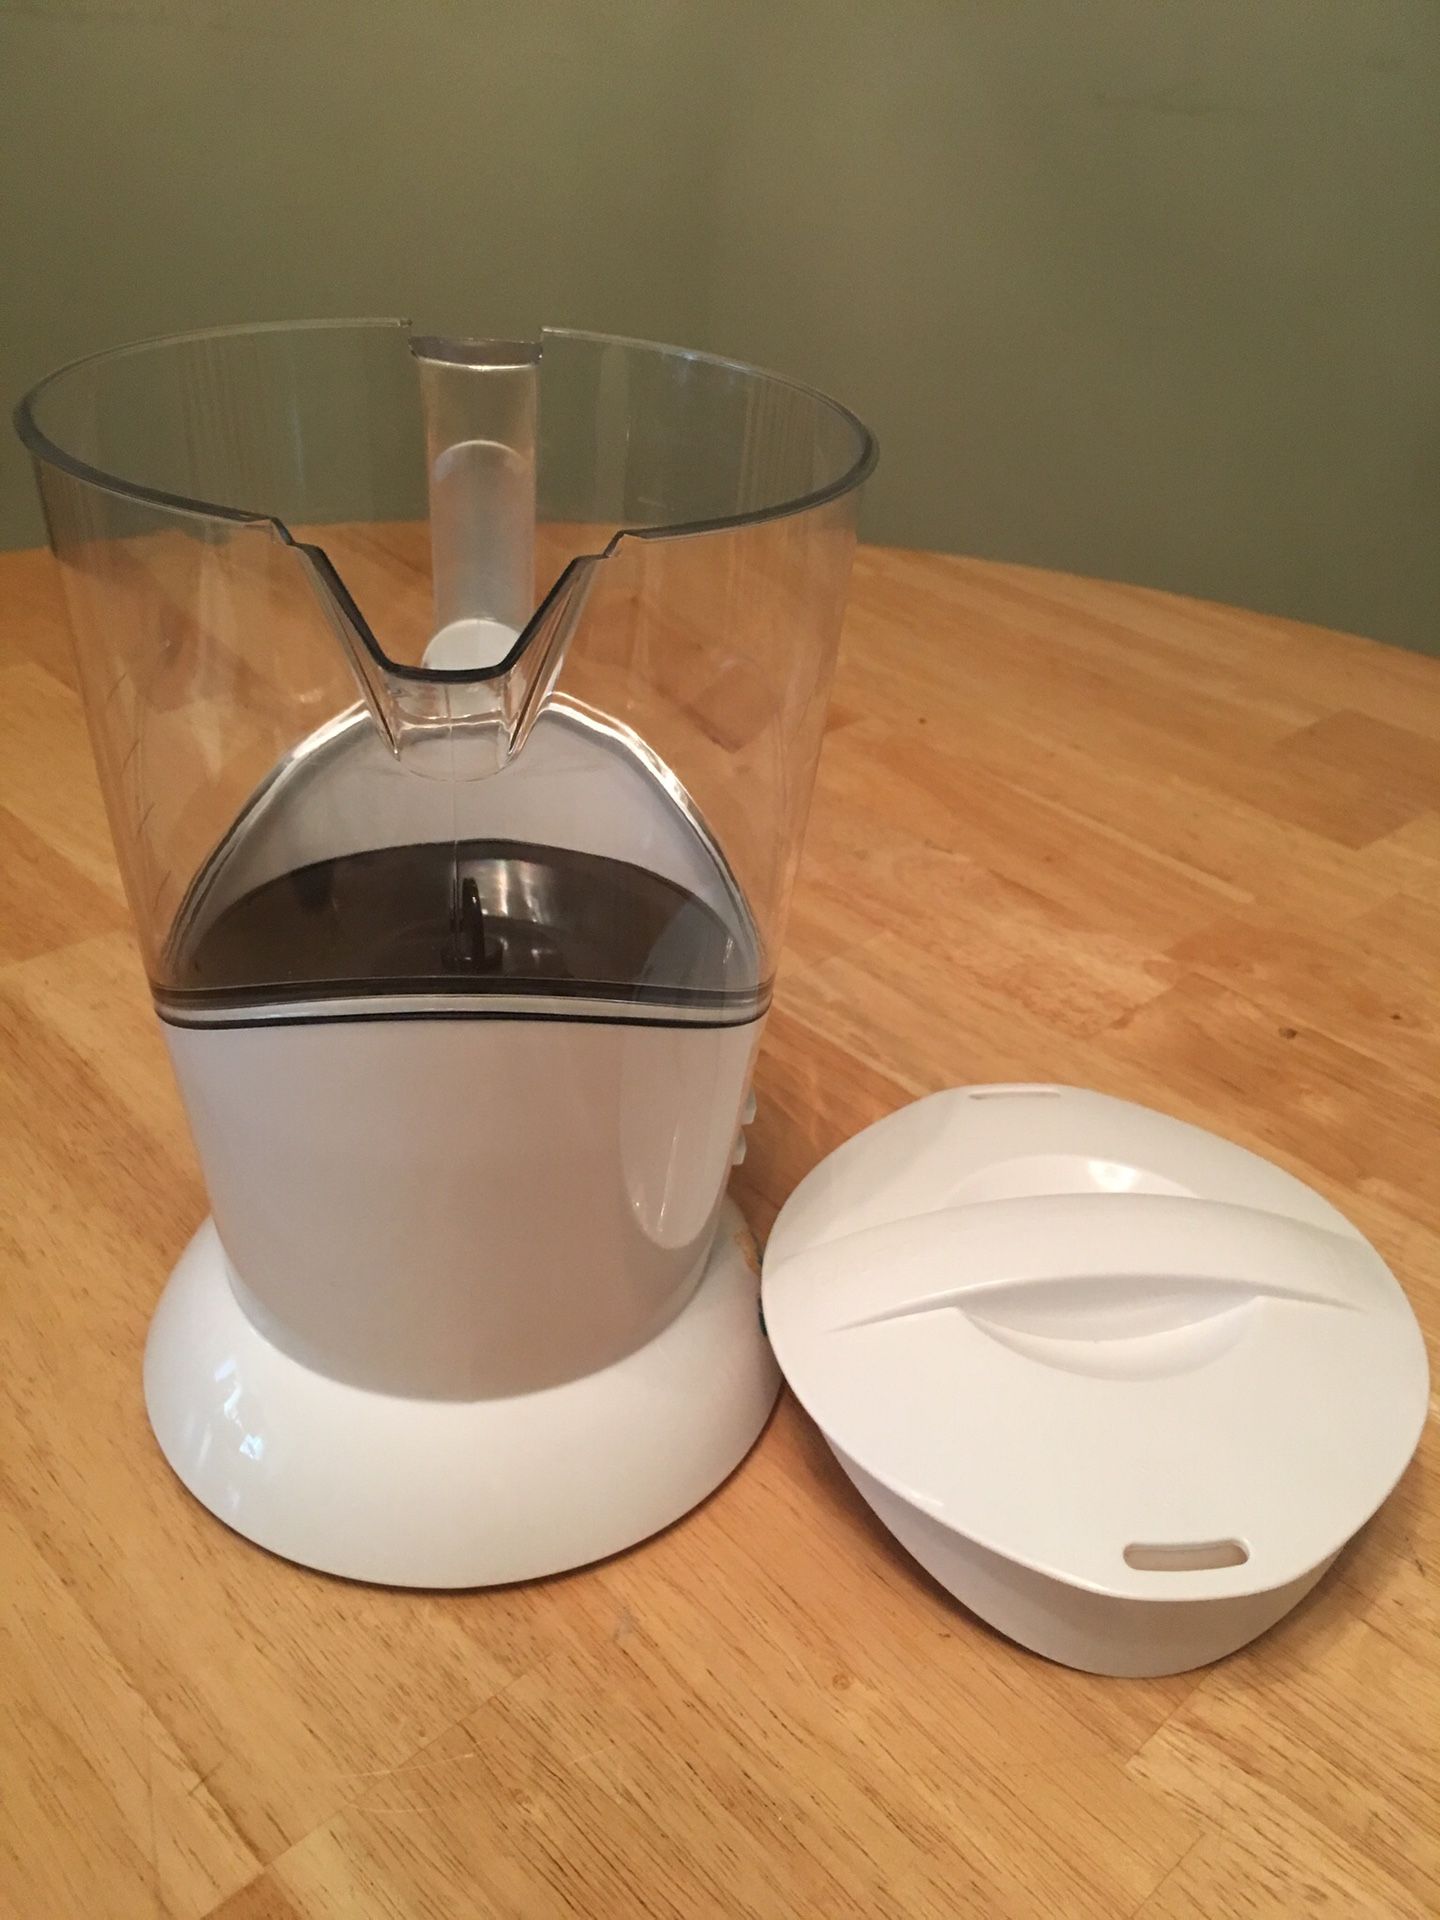 Hot Chocolate Maker for Sale in Westmont, IL - OfferUp